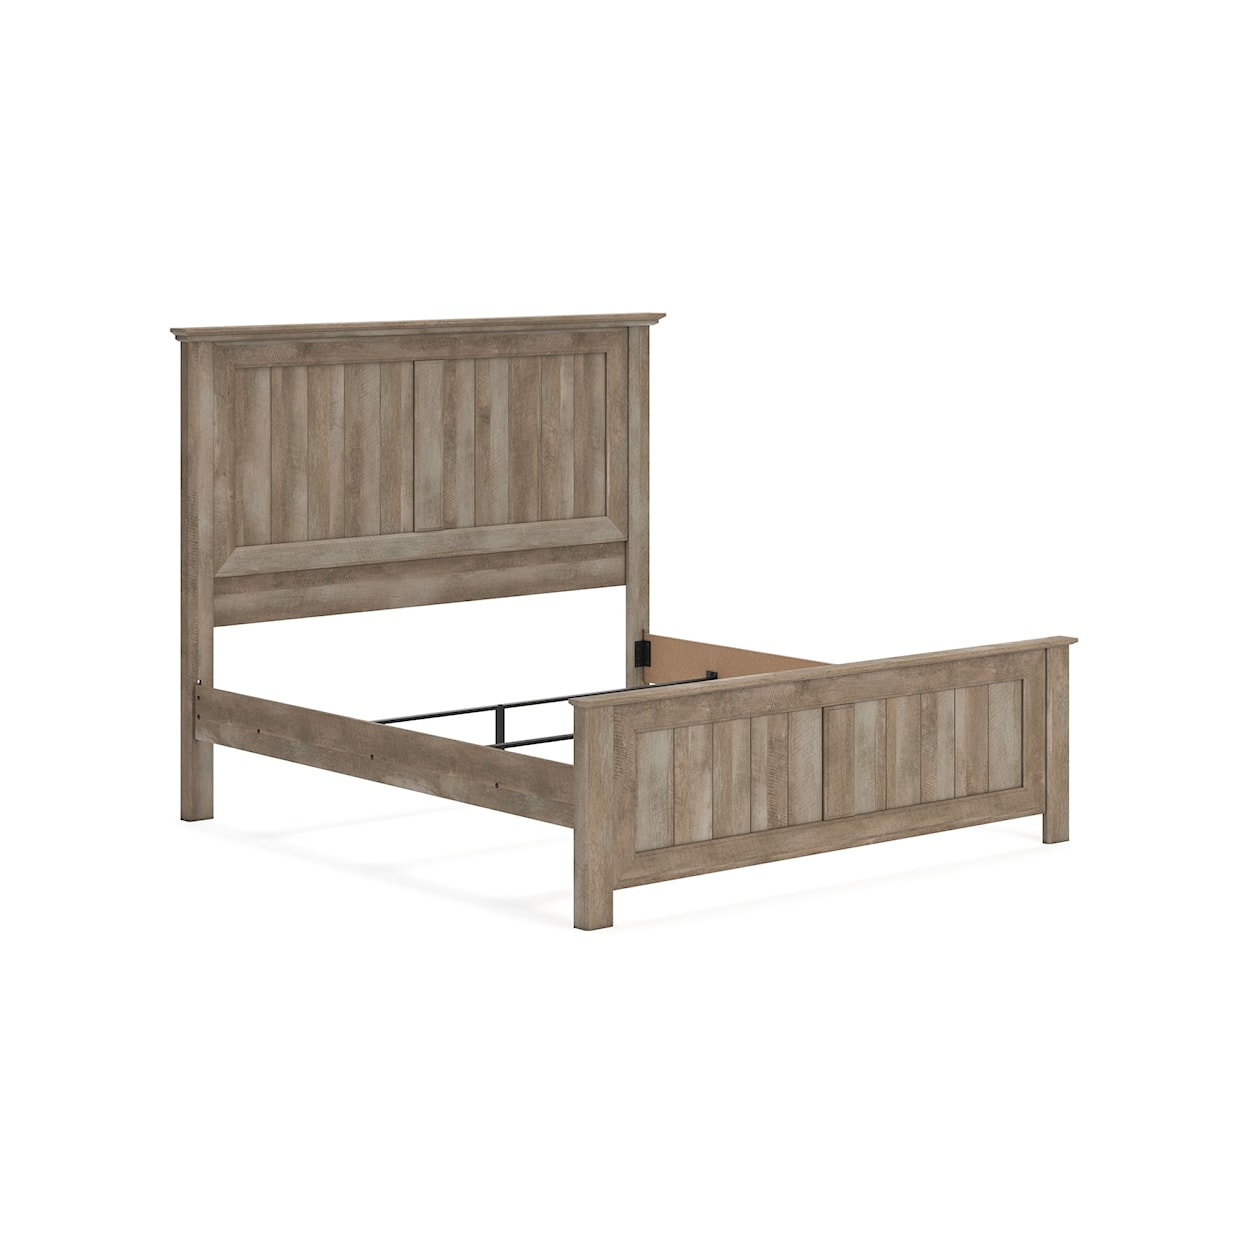 StyleLine Yarbeck King Panel Bed